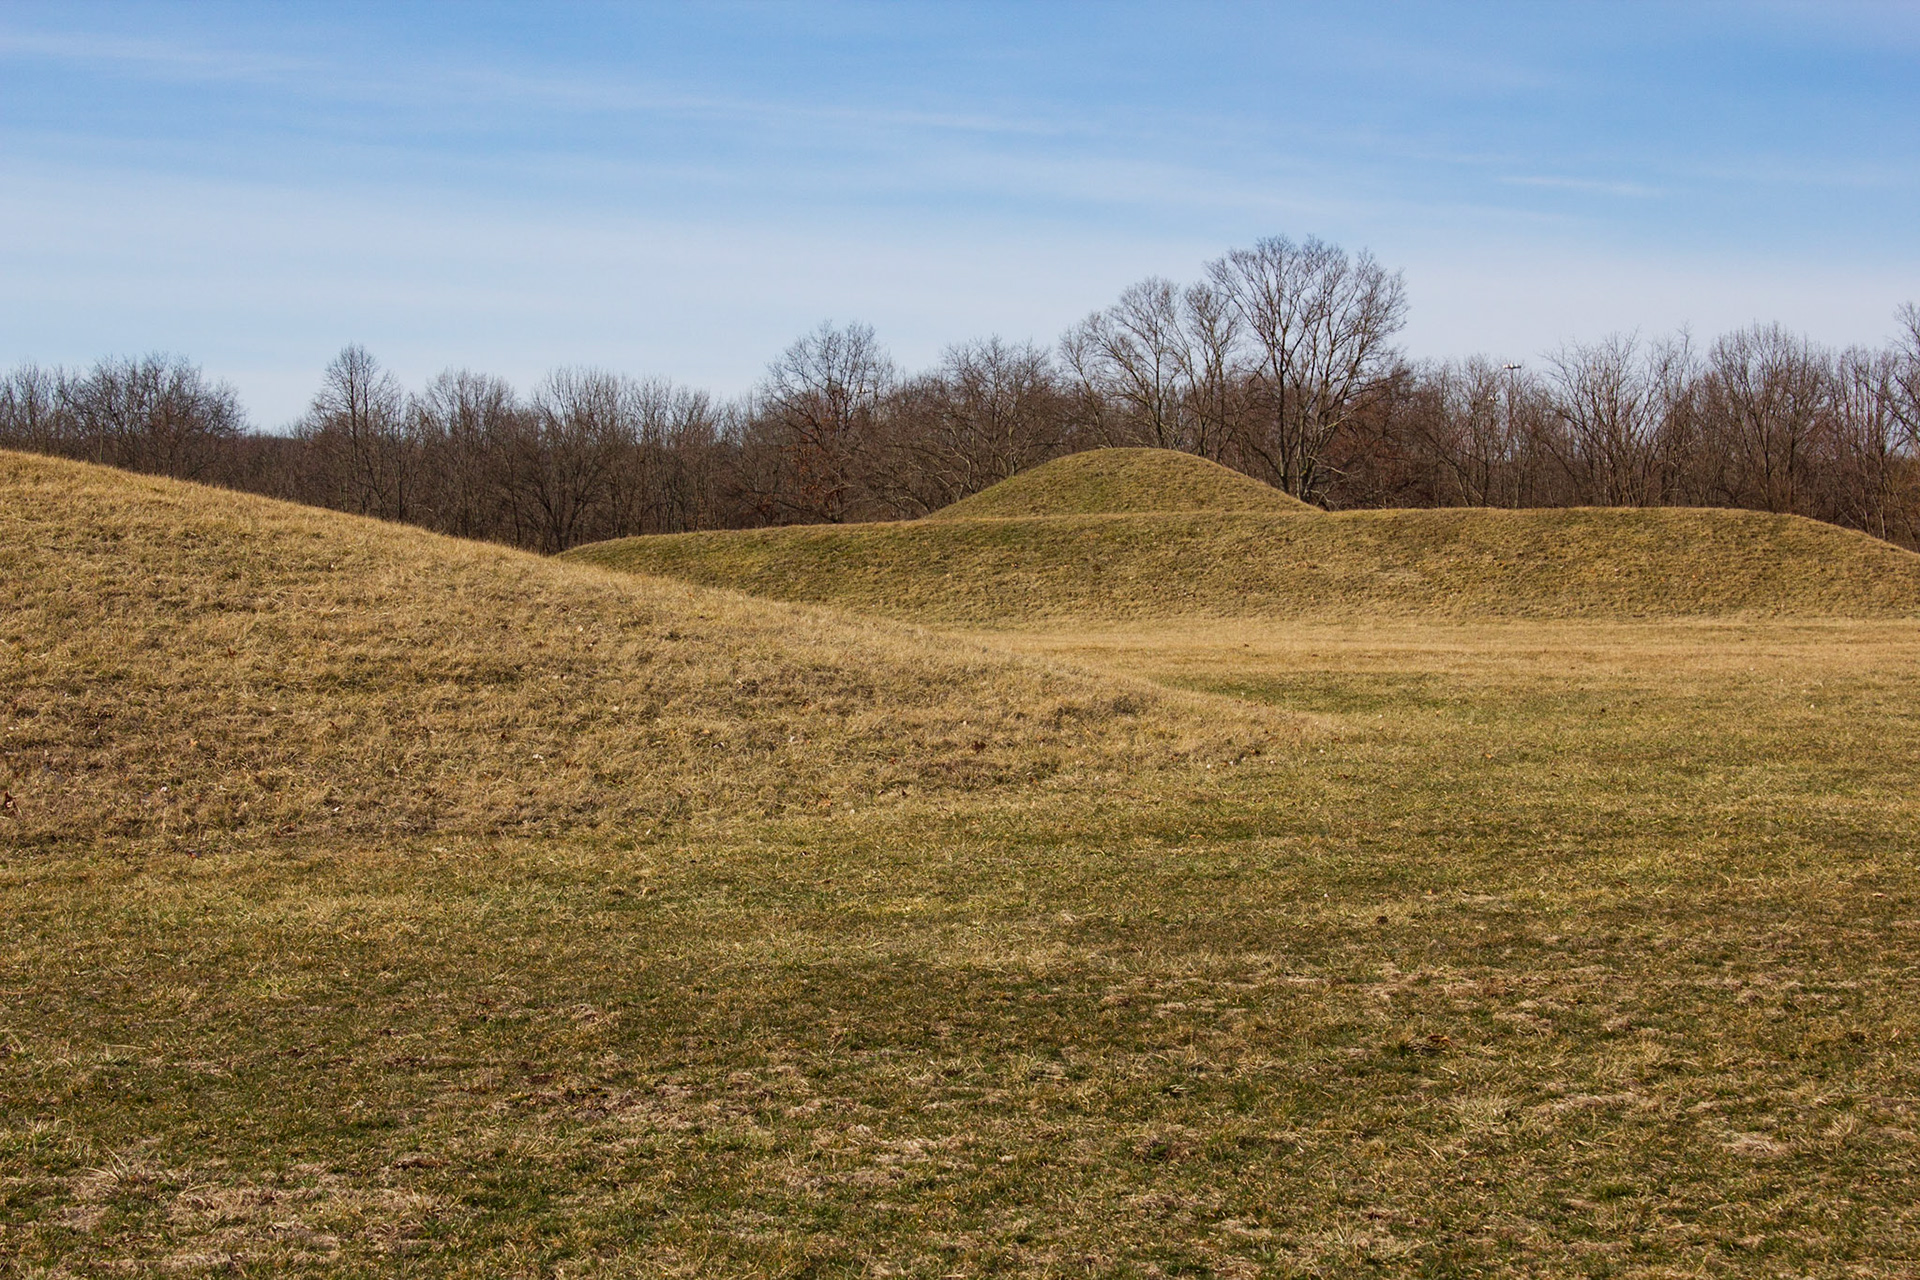 Our NPS Travels - Hopewell Culture National Historical Park